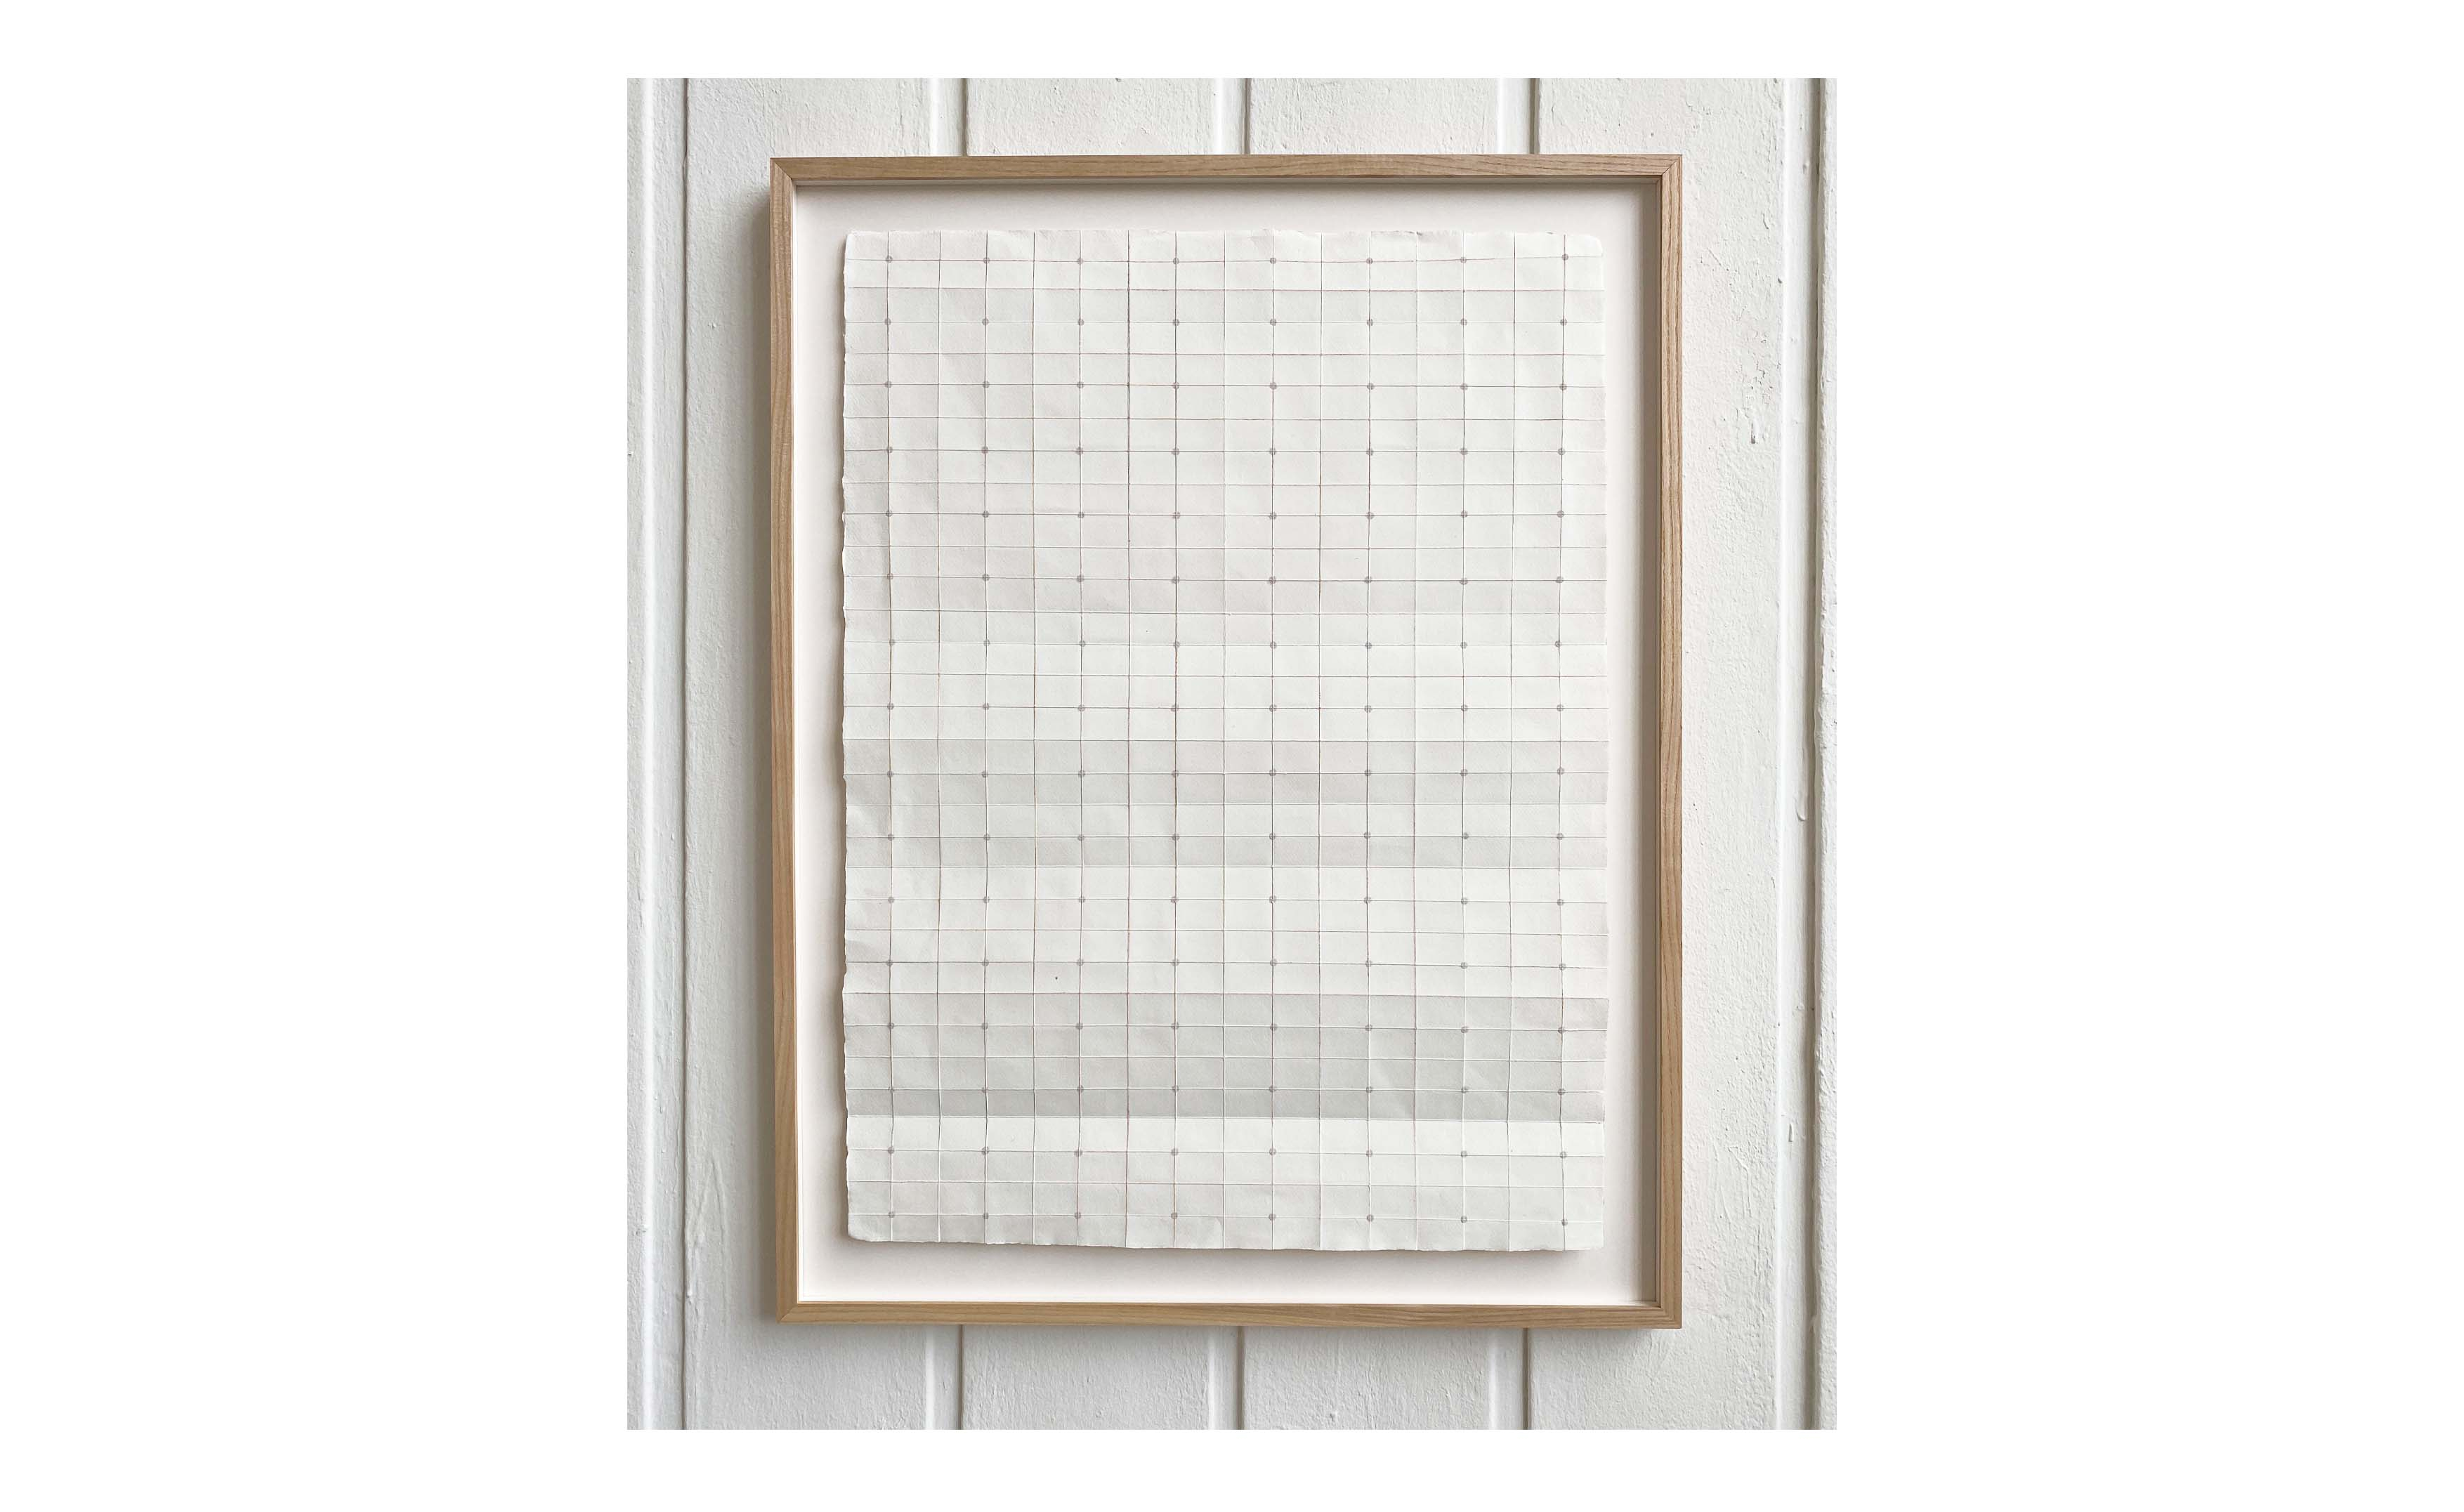 geometric drawing on paper in wooden frame displayed on a wall